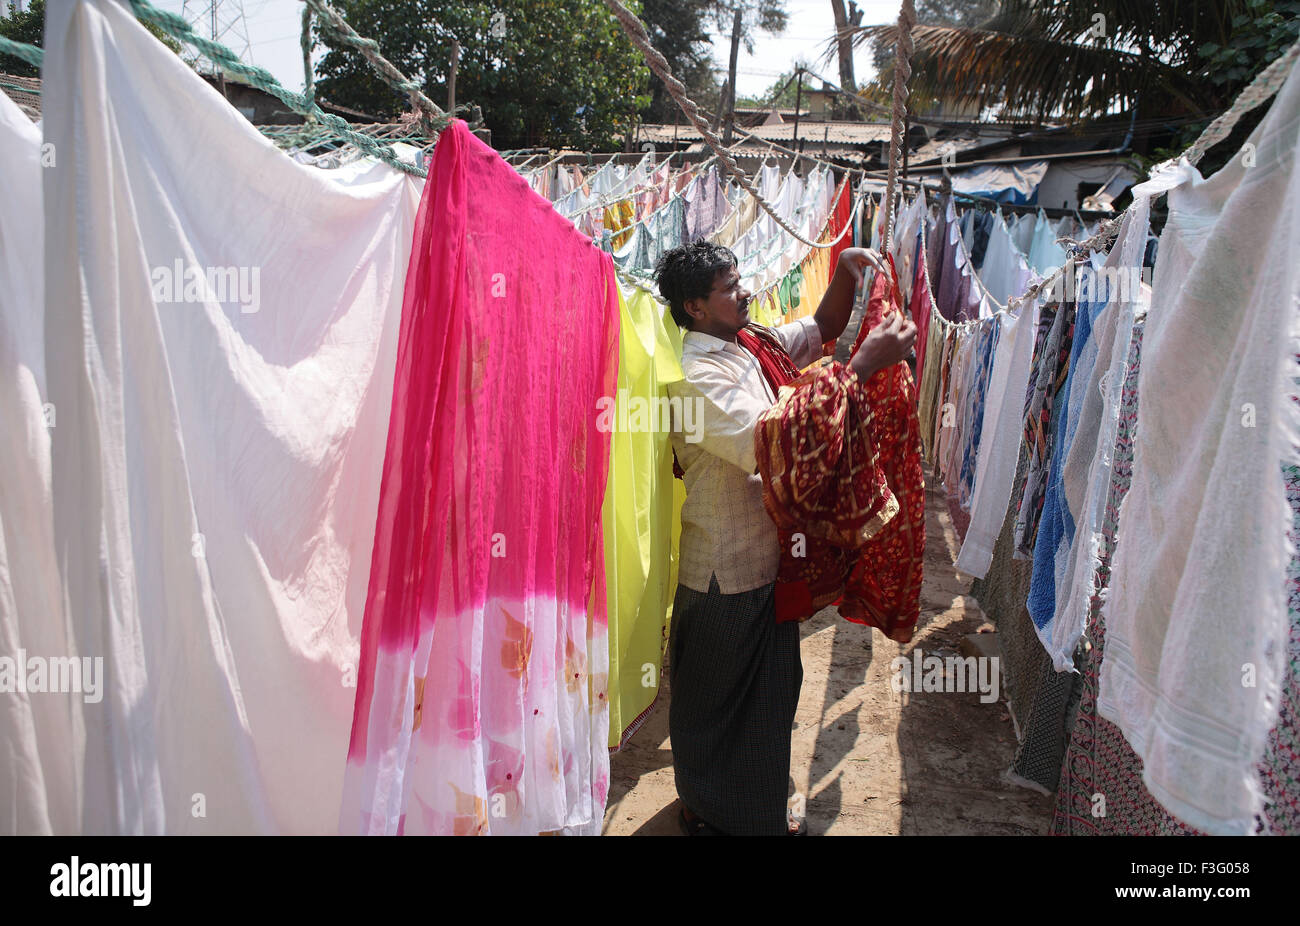 Clothes being hanged for drying at Lower Parel ; Bombay now Mumbai ; Maharashtra ; India Stock Photo